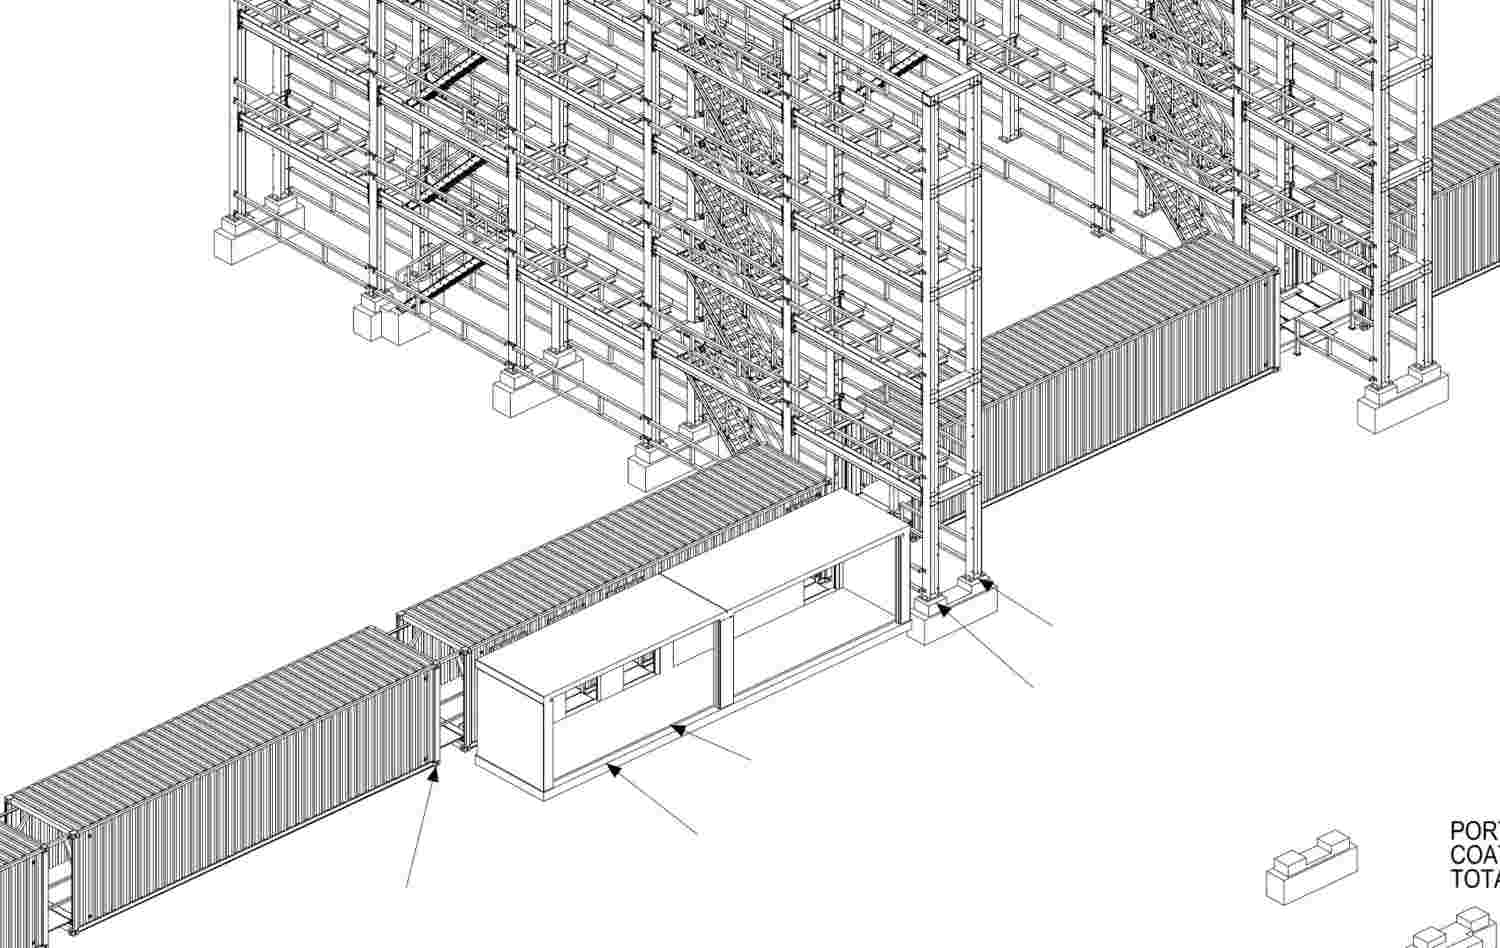 LAYOUT AND DIMENSIONS OF REEFER RACKS AND PASSENGER TUNNELS